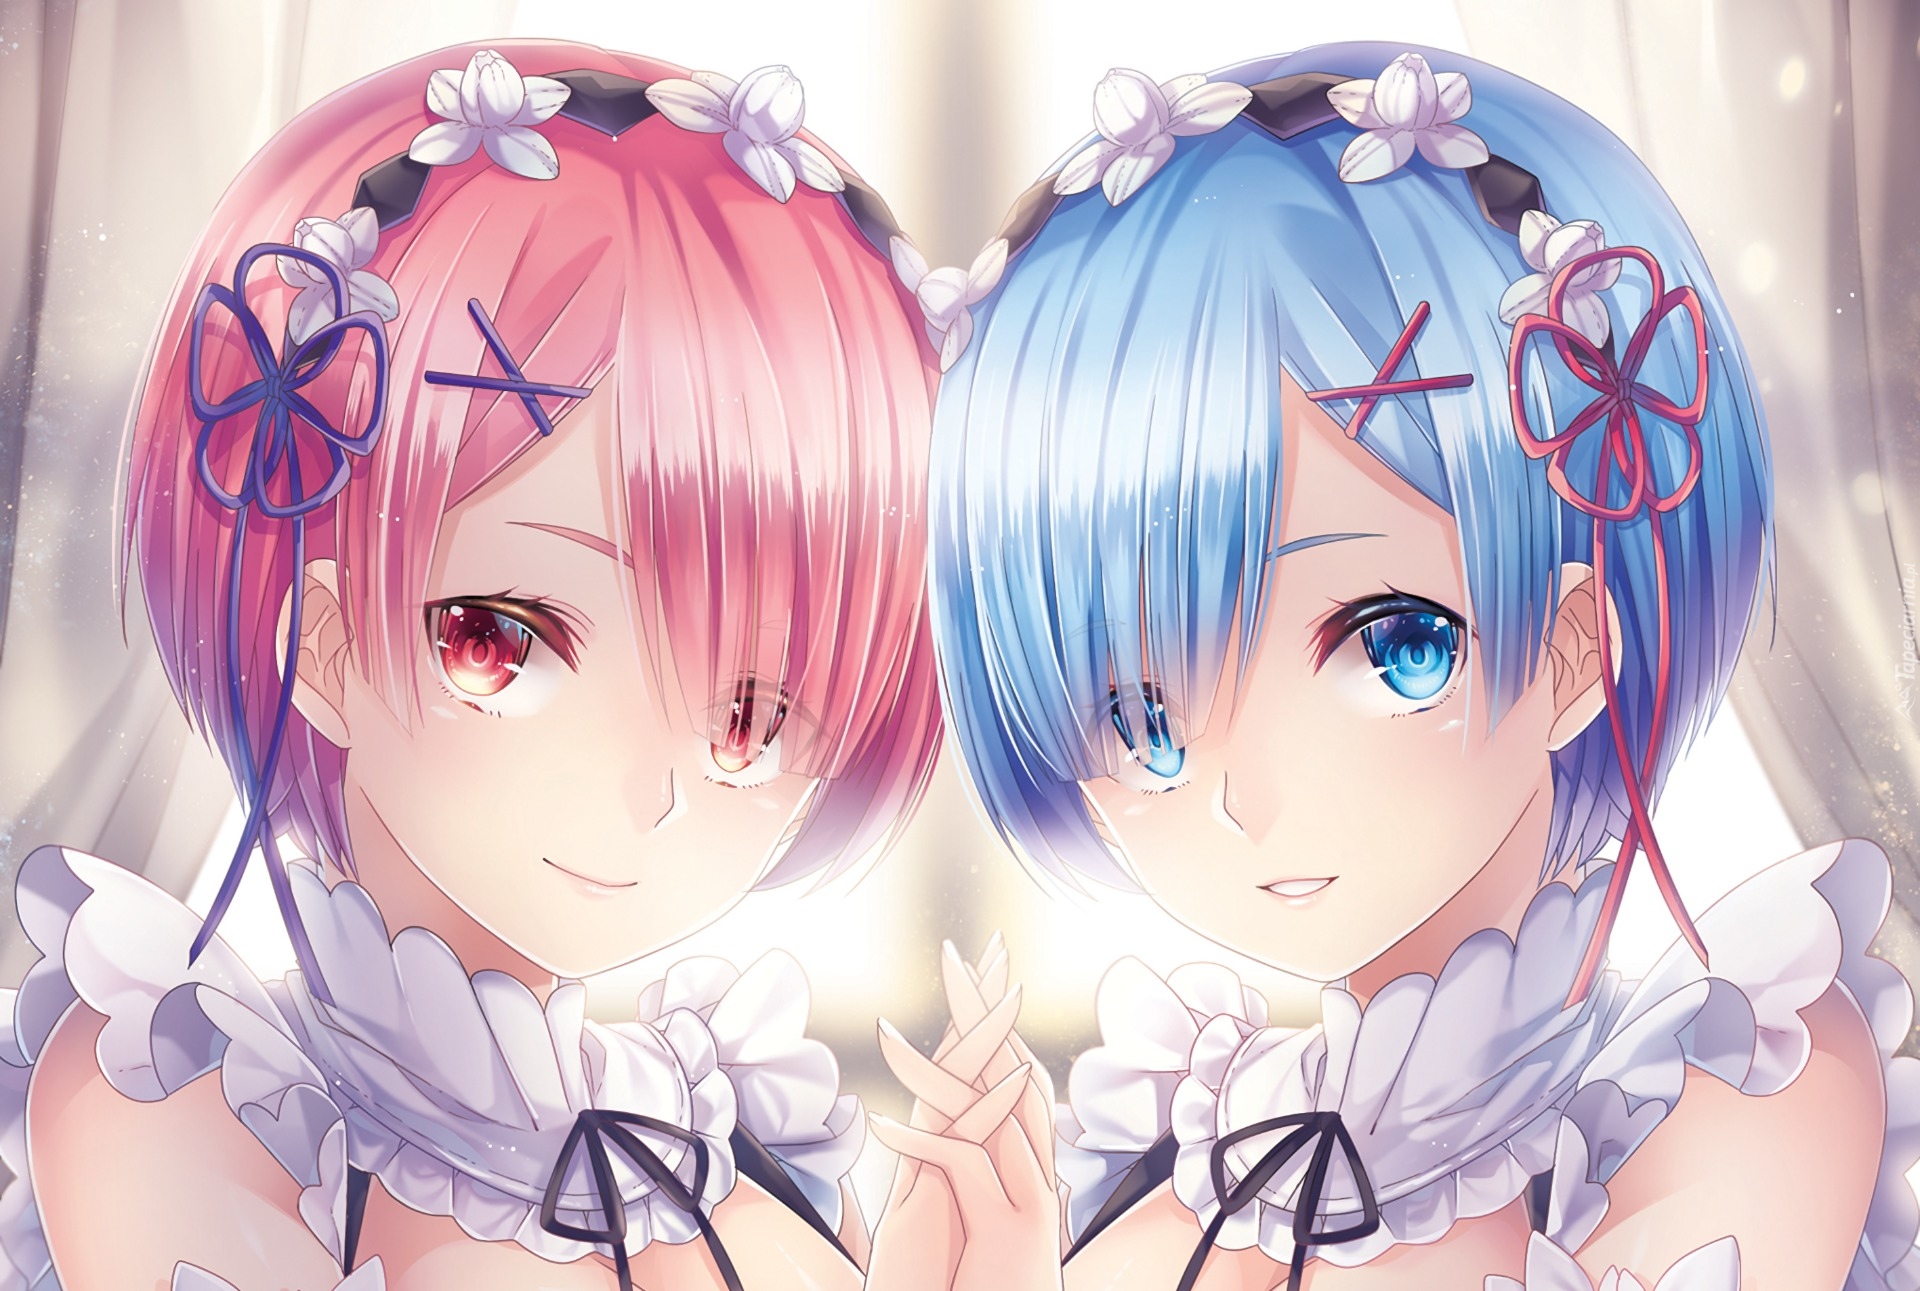 Manga Anime, Re:Zero − Starting Life in Another World, Siostry, Ram, Rem